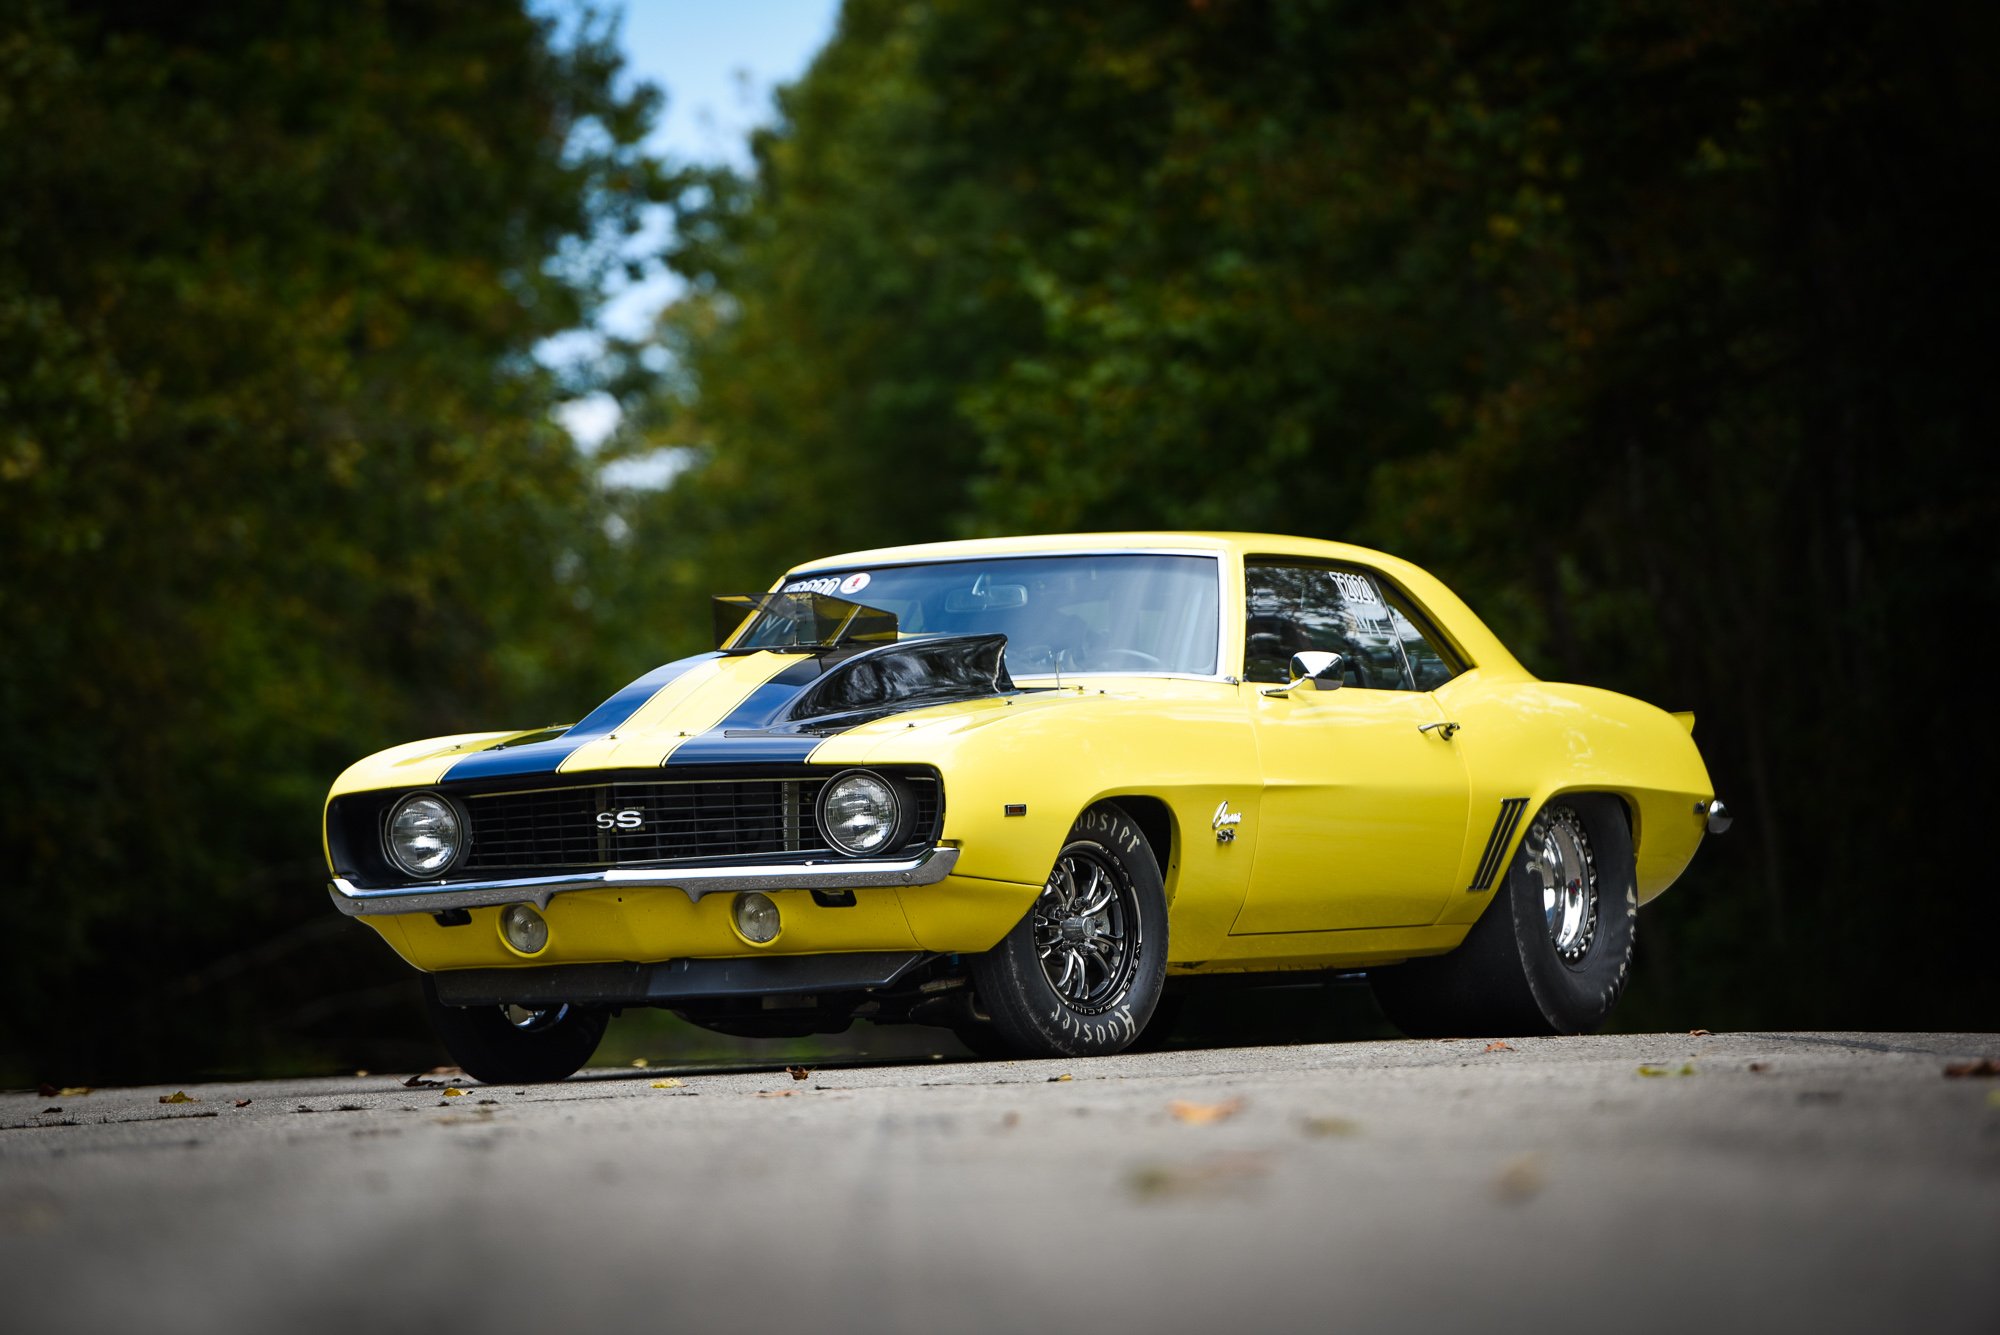 Eric Trigalet’s All-Steel ’69 Camaro SS Is A No-Prep Show Piece!